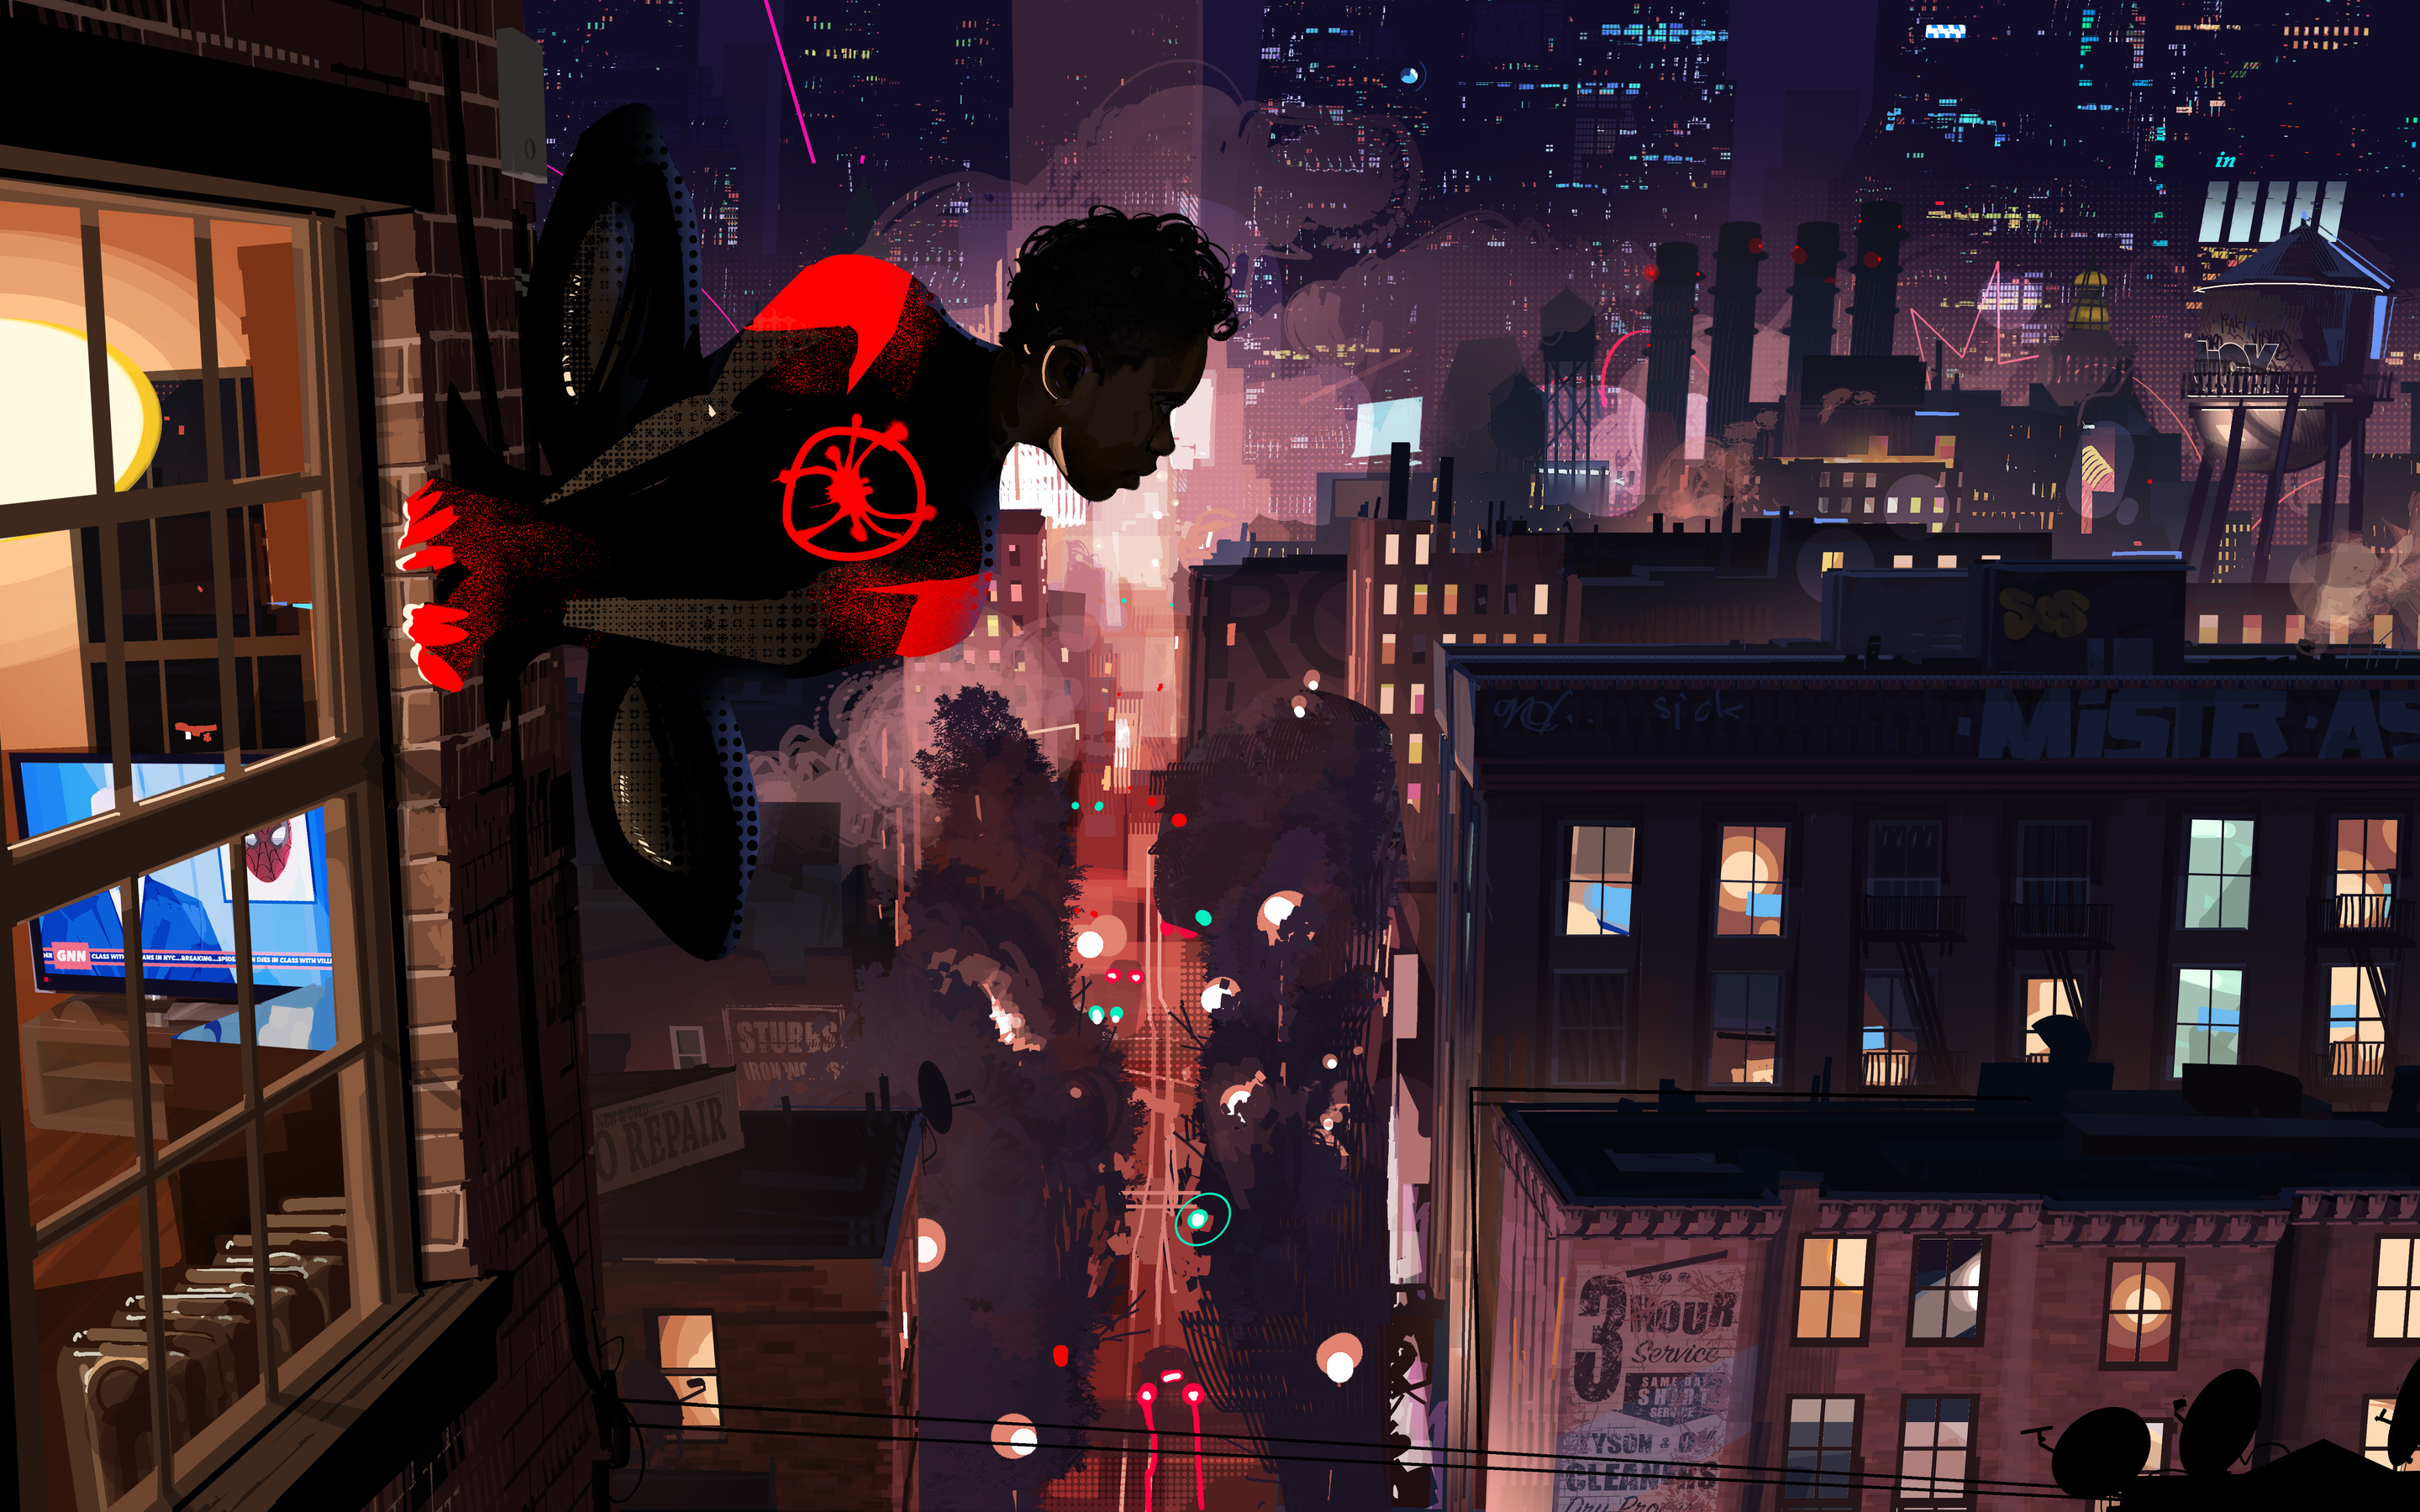 General 2880x1800 Spider-Man Spider-Man: Into the Spider-Verse Miles Morales city night building rooftops fan art Patrick O'Keefe movies movie characters Marvel Comics